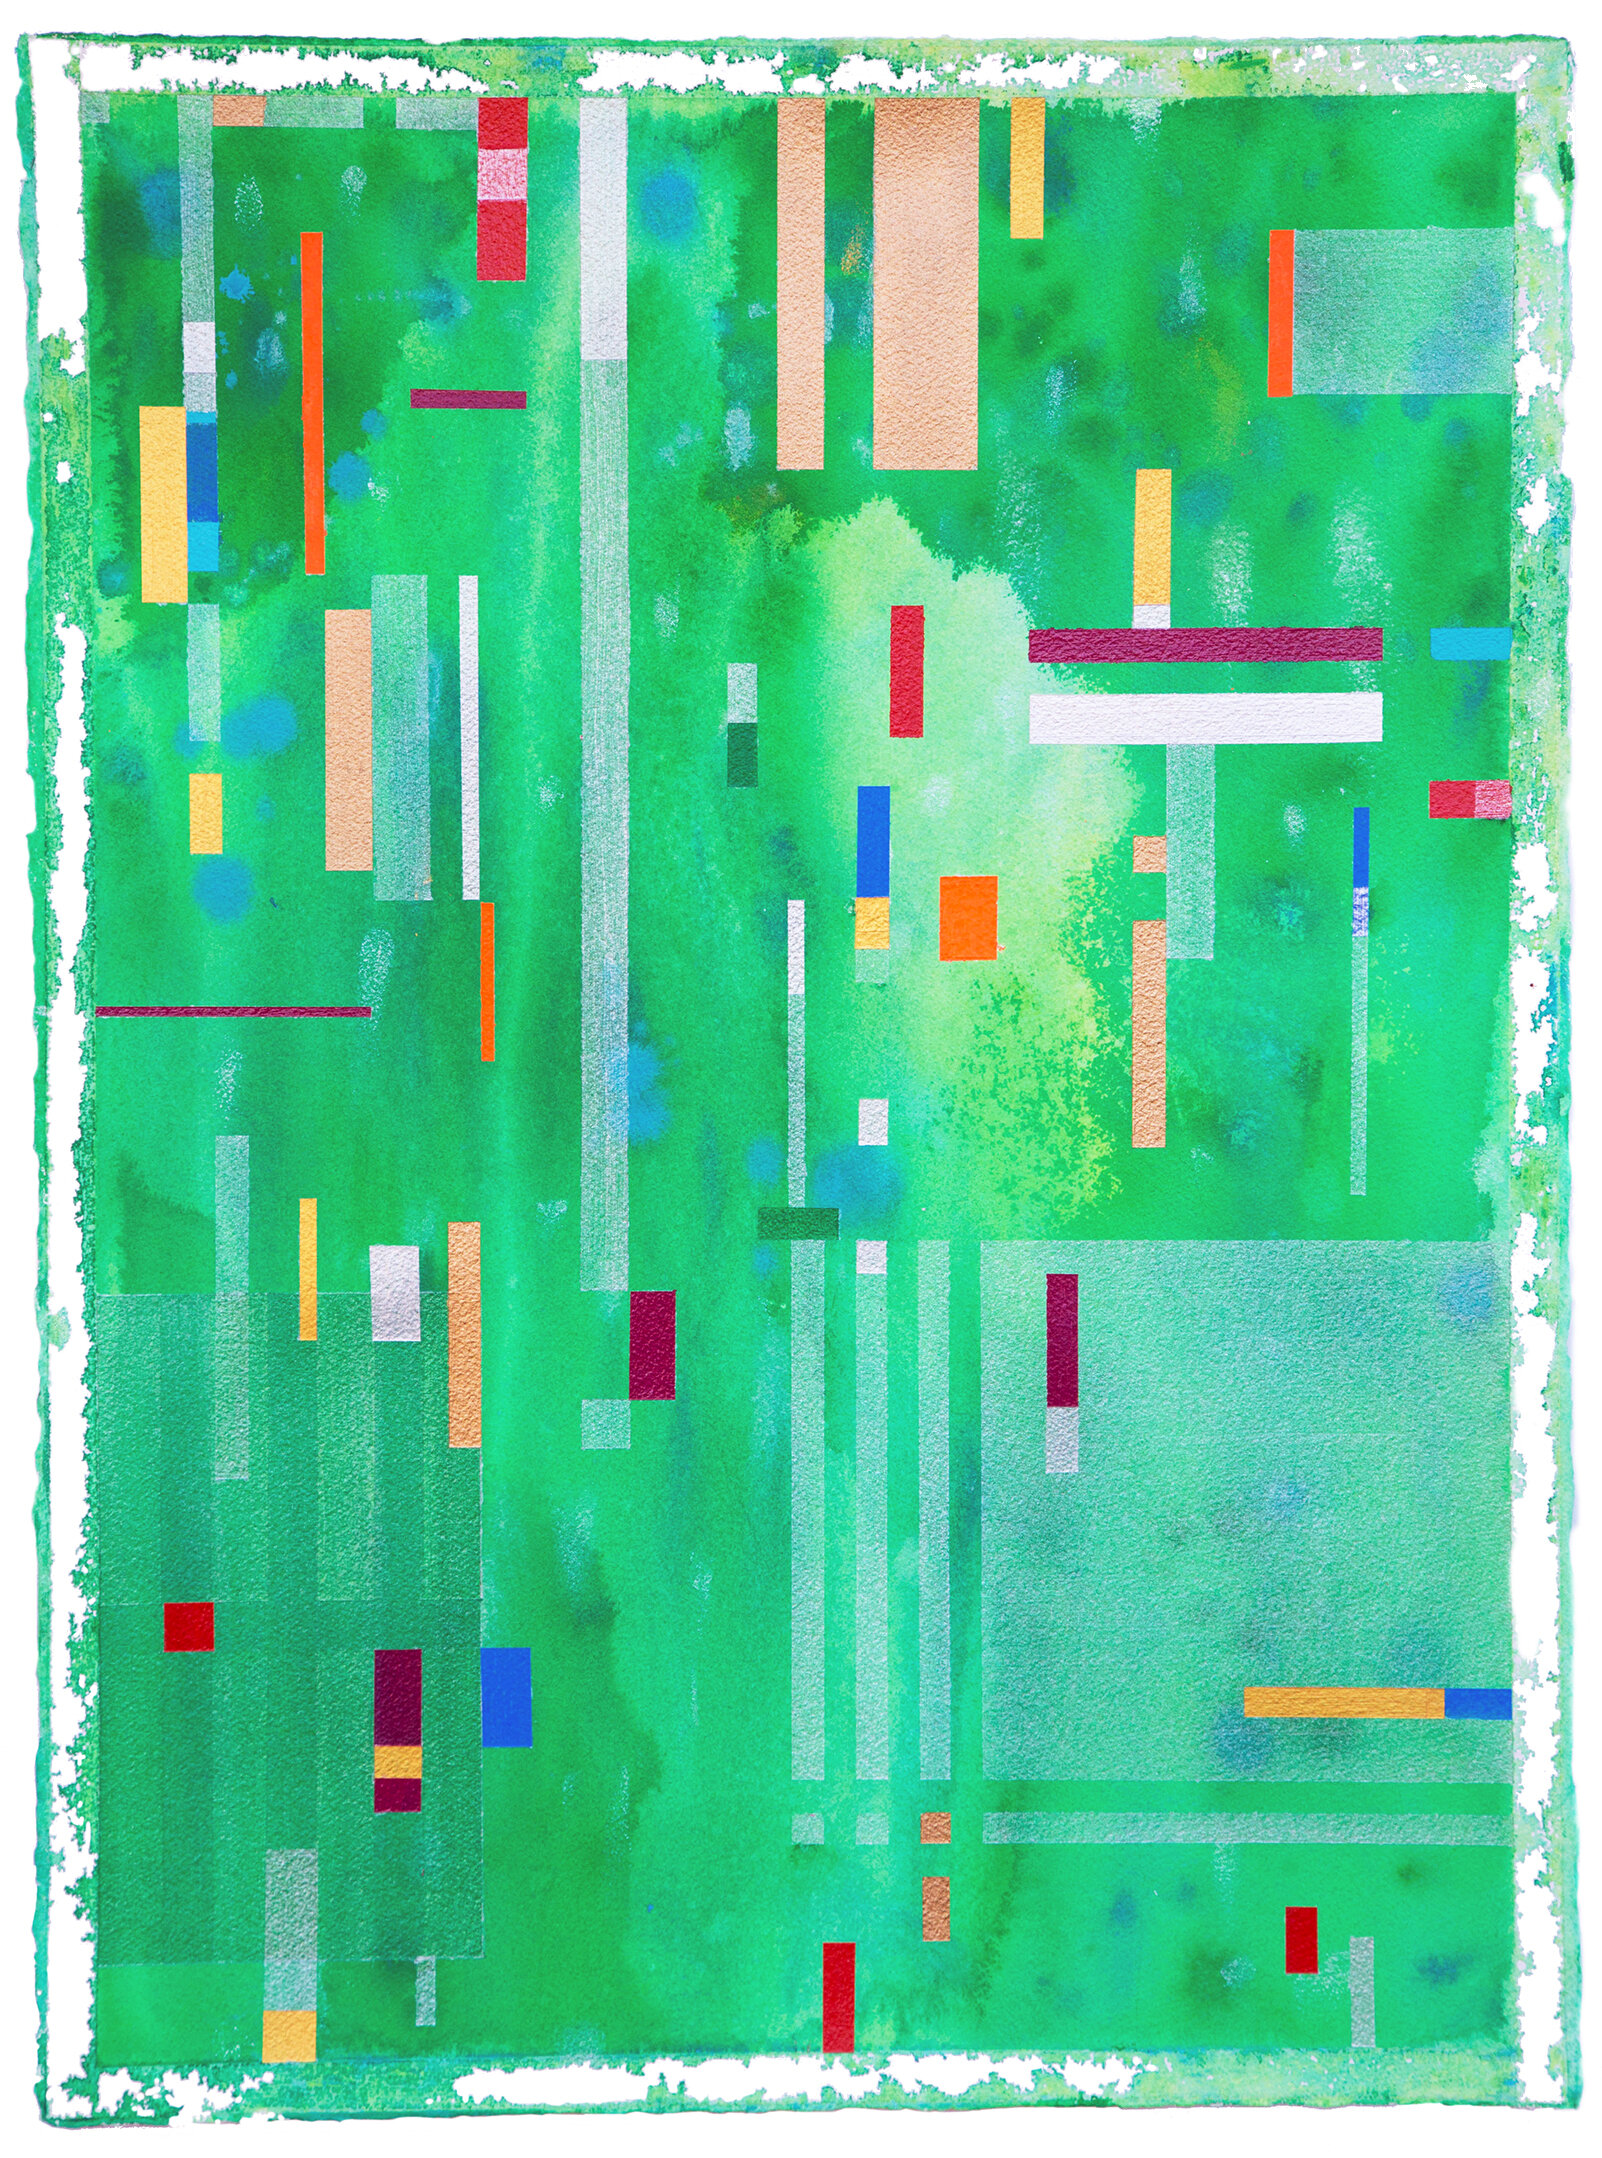  Mondrian Green  Mixed media on Arches Watercolor Paper 22 × 30 in $775 